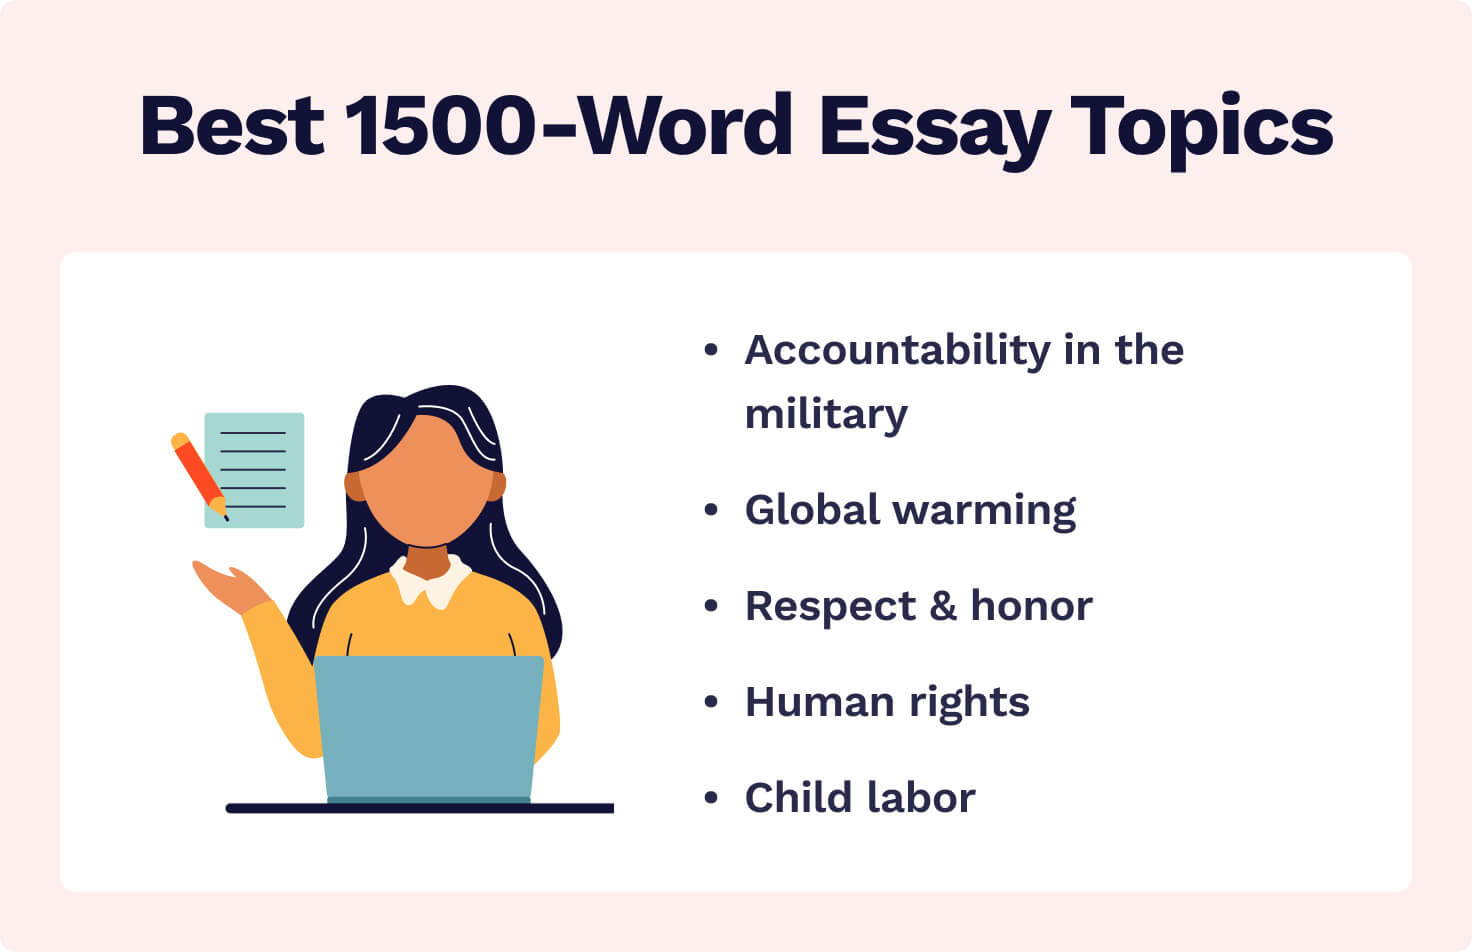 how to write 1500 words essay